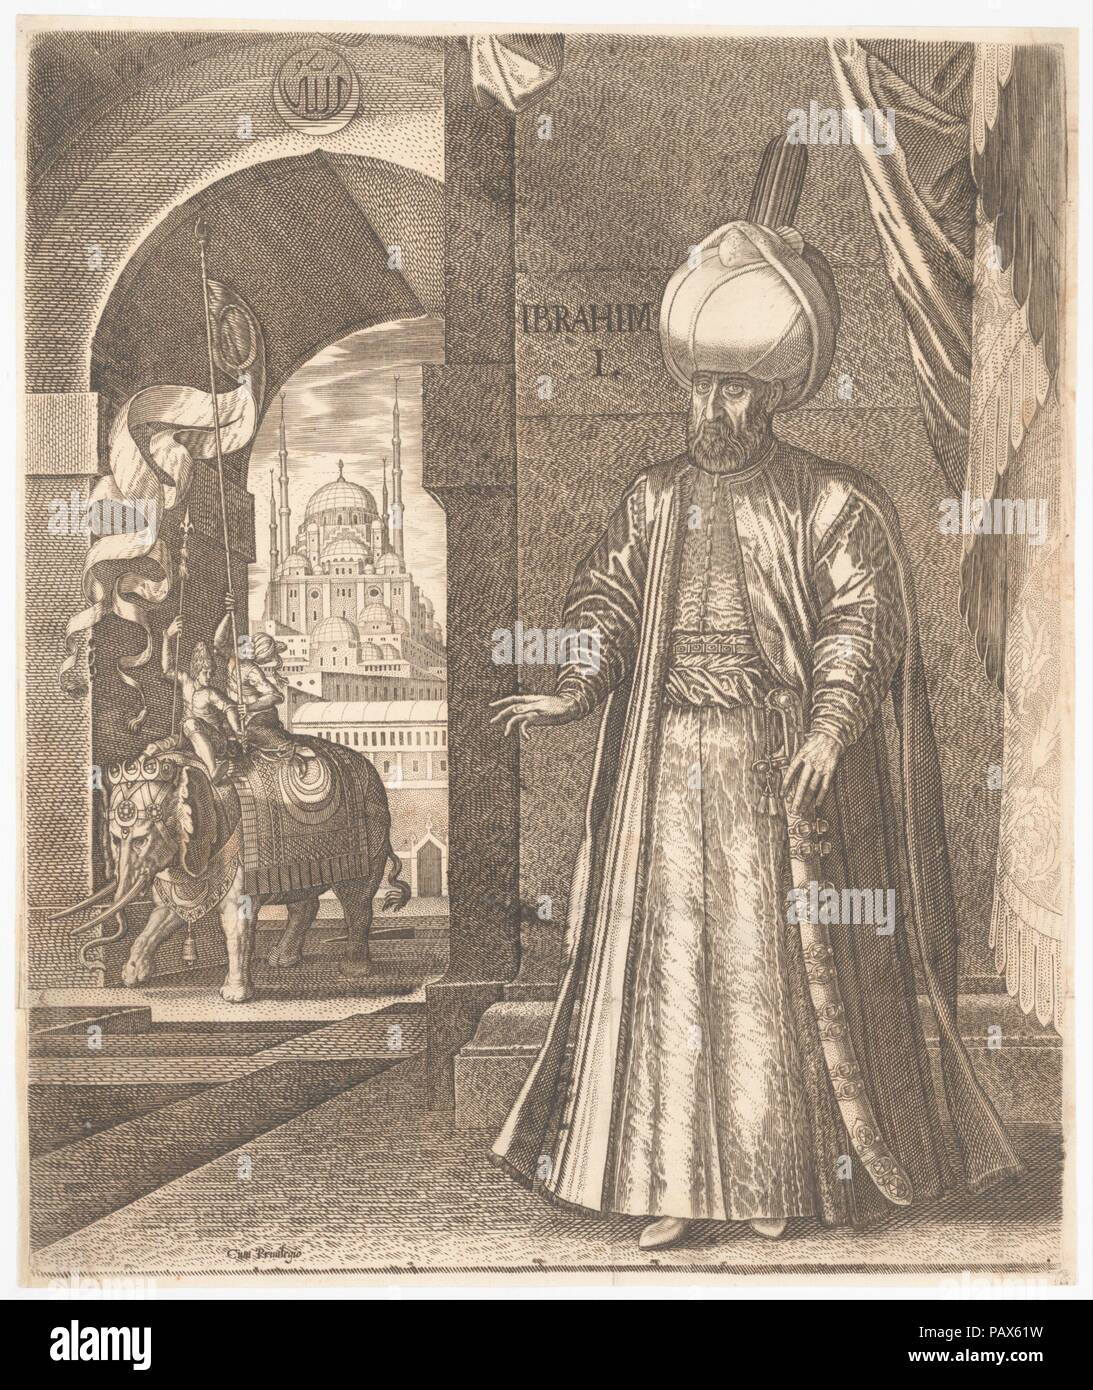 Sultan Süleyman and the Süleymaniye Mosque, Constantinople, 1574 (or earlier) , altered in 1688 to represent Ibrahim I. Artist: Melchior Lorck (Danish, Flensburg 1526-after 1588 Hamburg (?)). Dimensions: 15 13/16 x 11 1/4 in. (40.2 x 28.6 cm). Date: 1559-1688. Museum: Metropolitan Museum of Art, New York, USA. Stock Photo